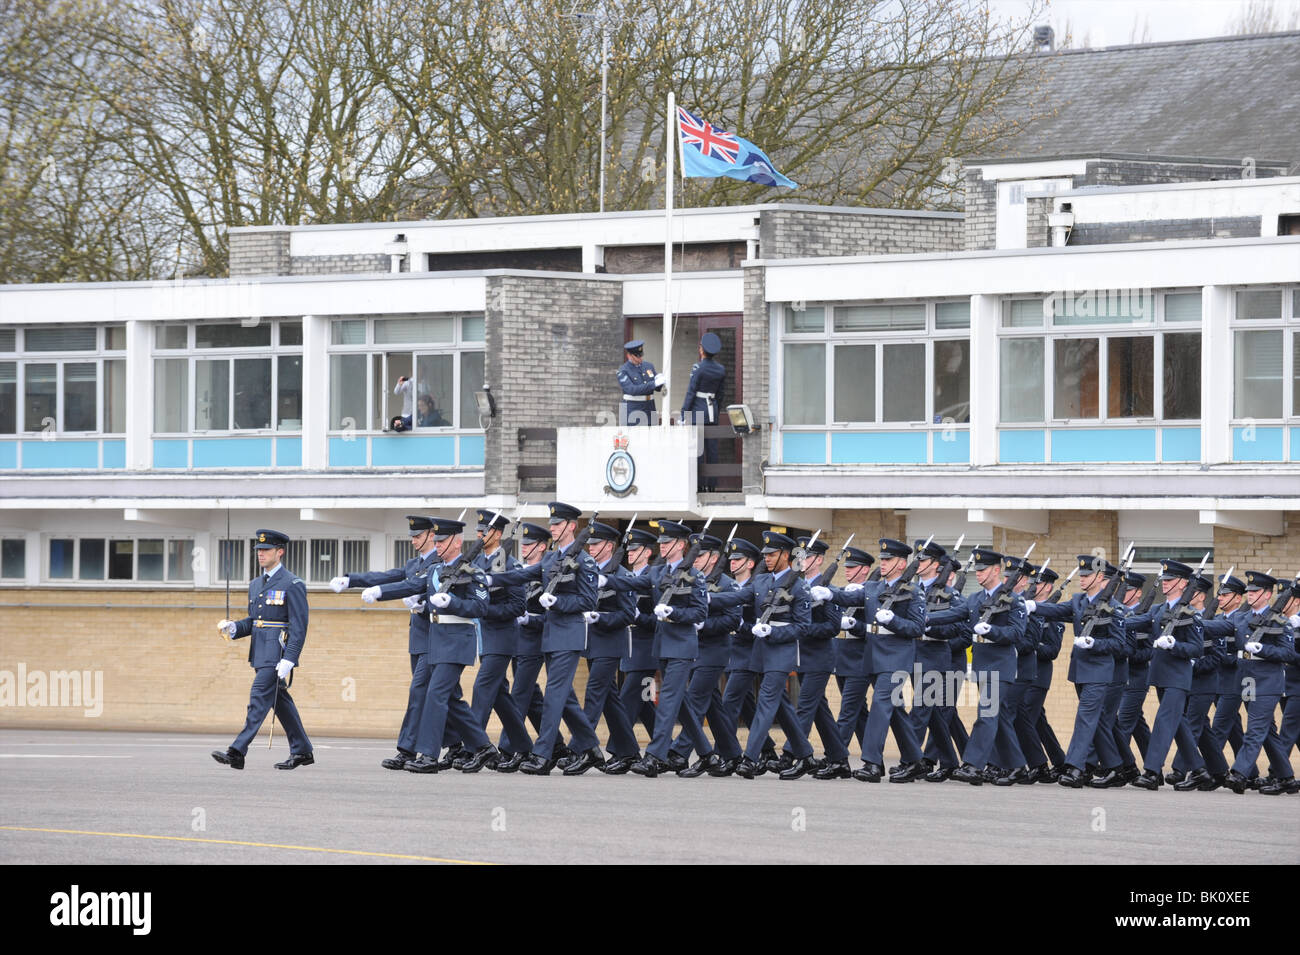 RAF marching on Parade ground Stock Photo